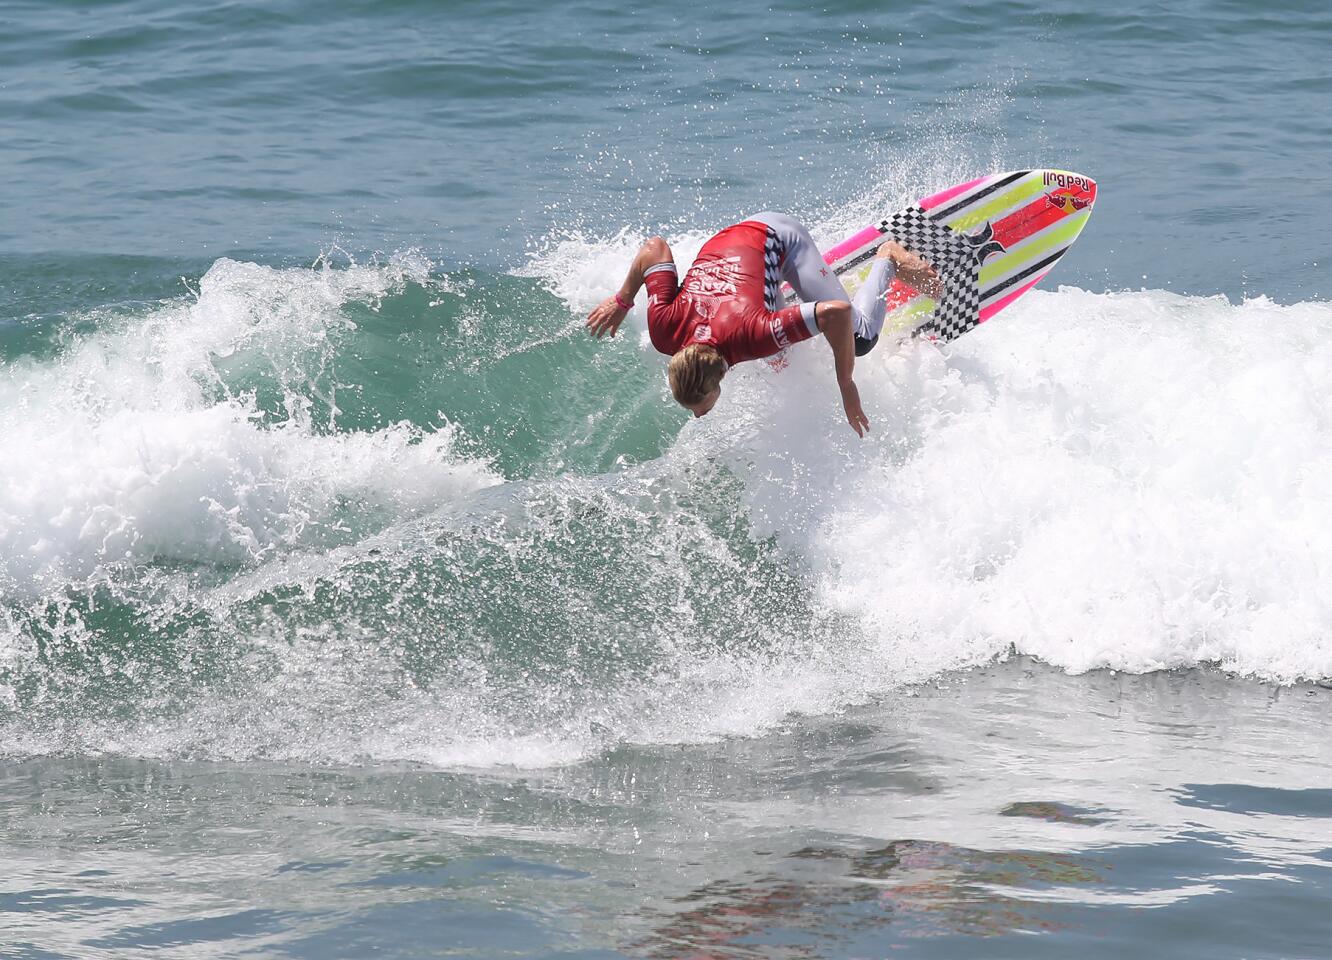 San Clemente's Kolohe Andino goes backside off the top of a wave during round three of the Men's US Open of Surfing on Thursday.